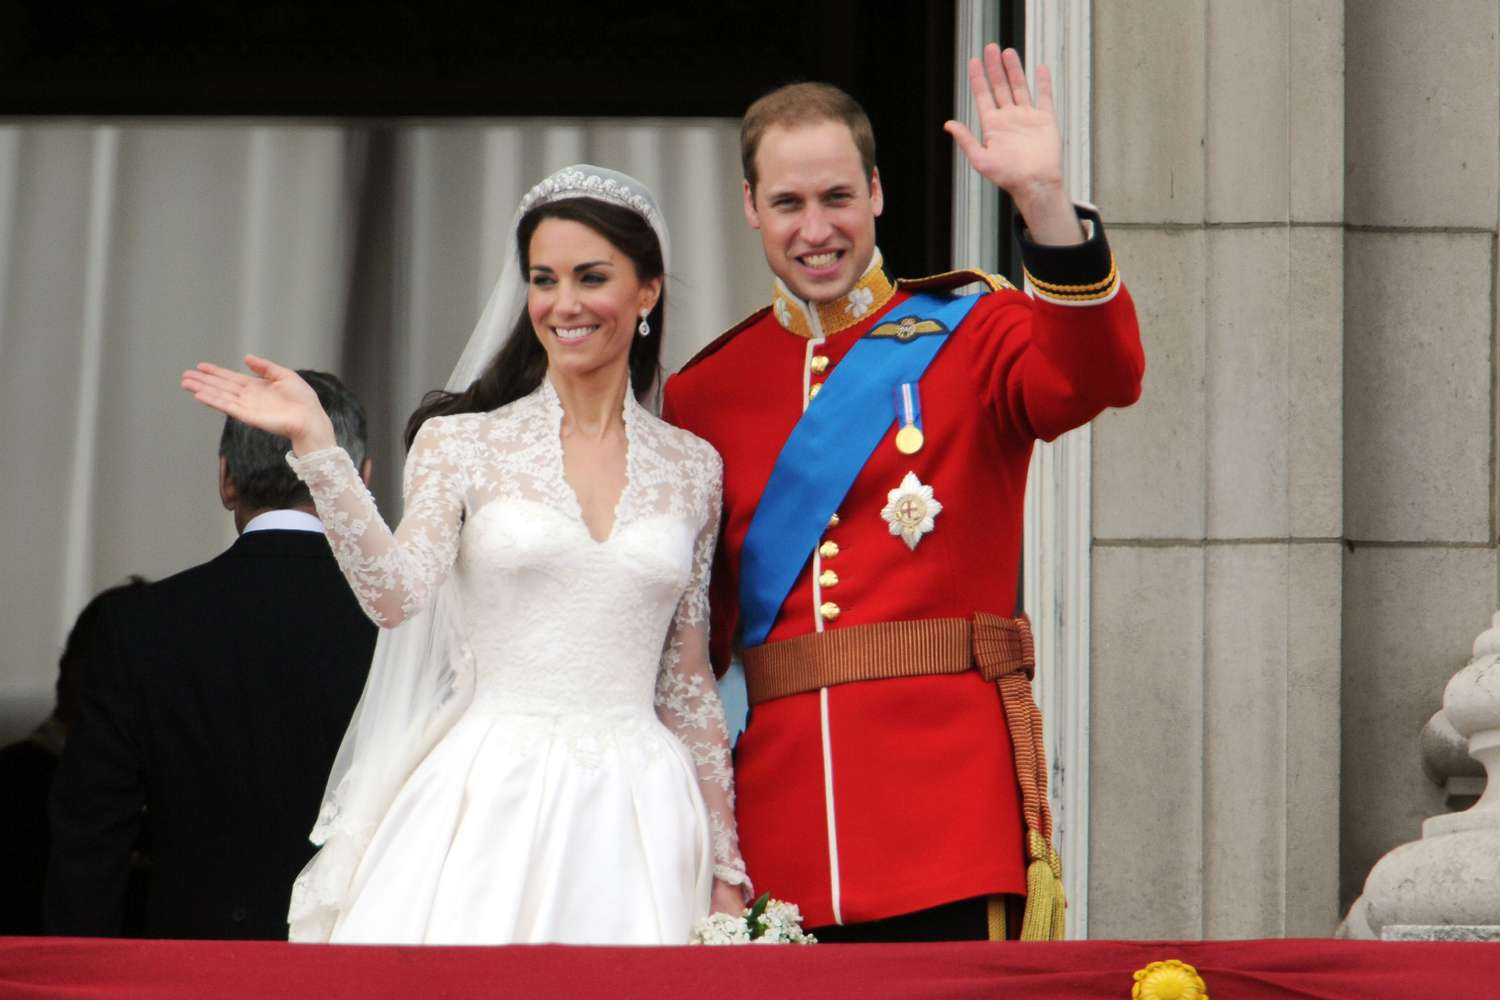 Kate Middleton wearing a white wedding gown and Prince William wearing a red wedding outfit